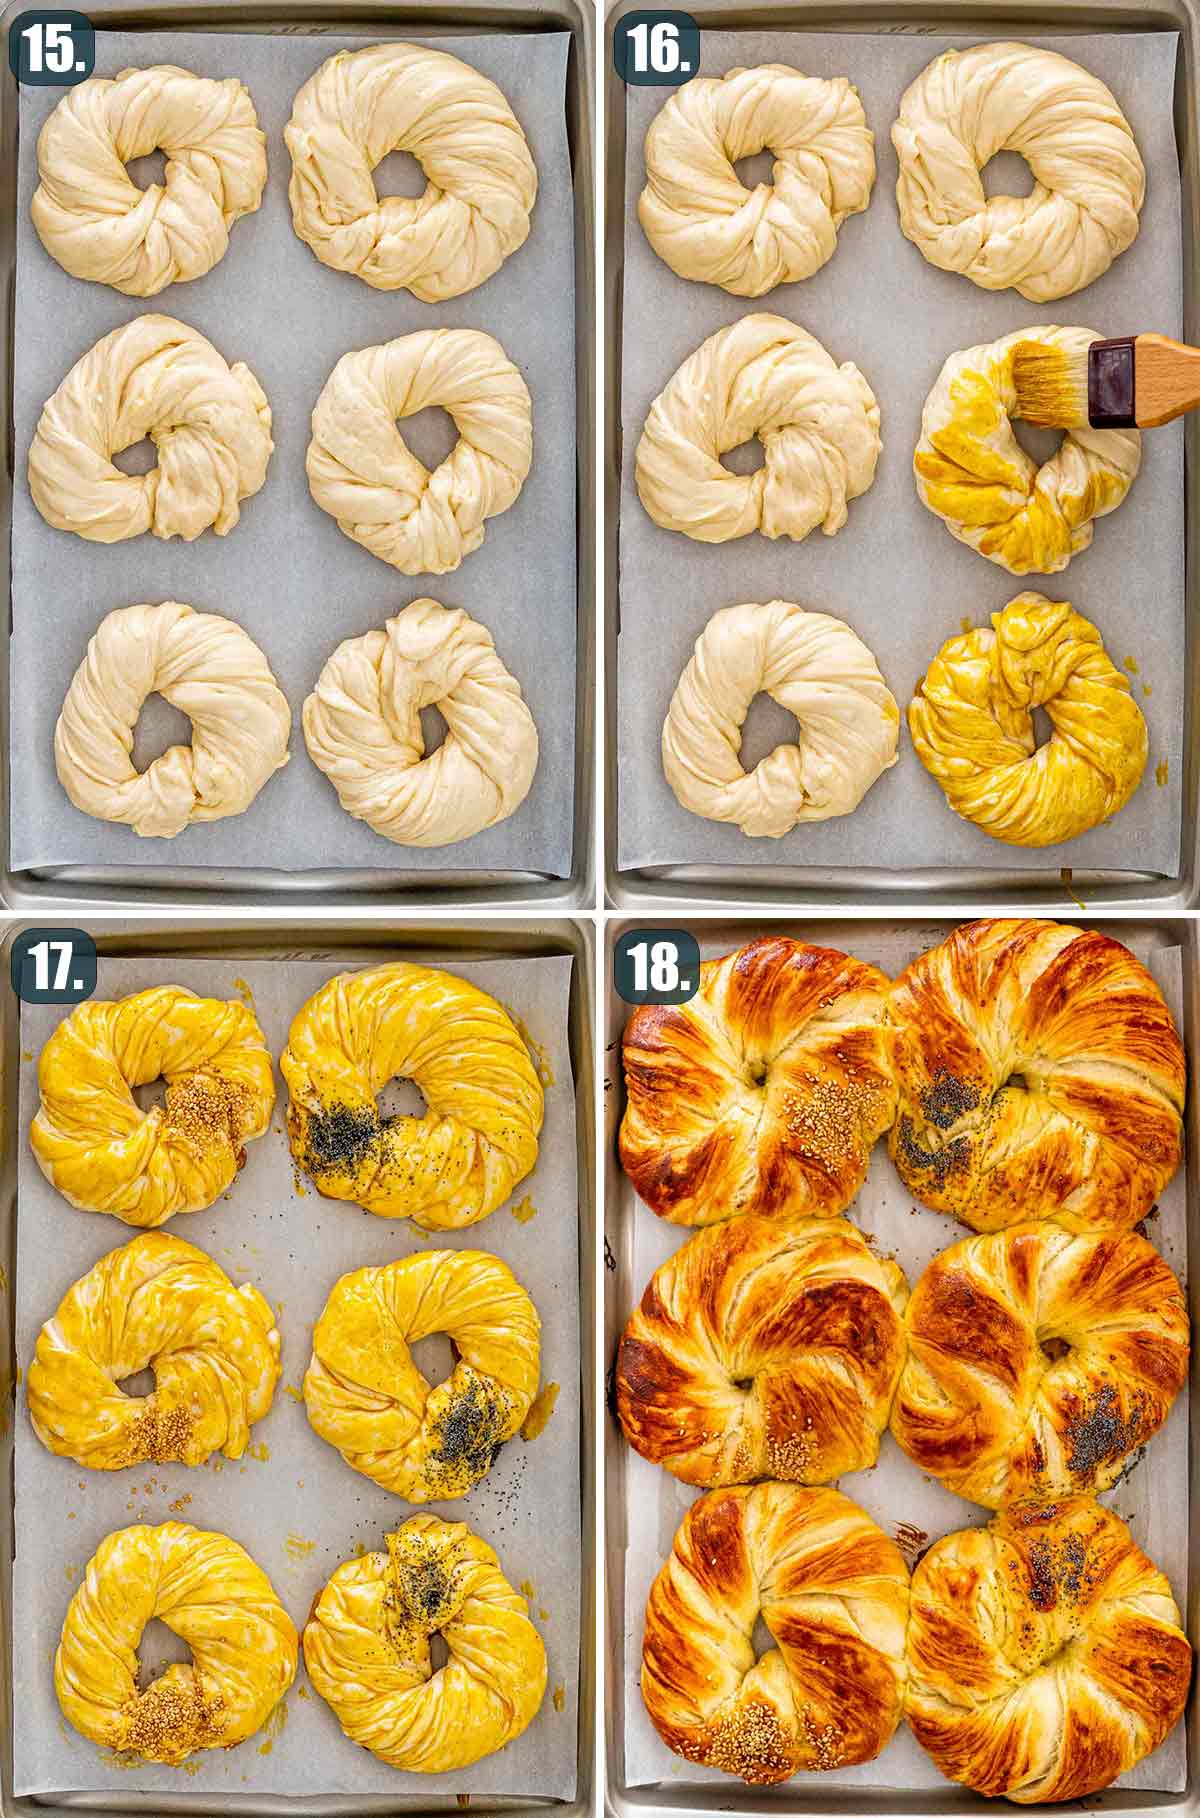 process shots showing how to prepare brioche buns for baking.